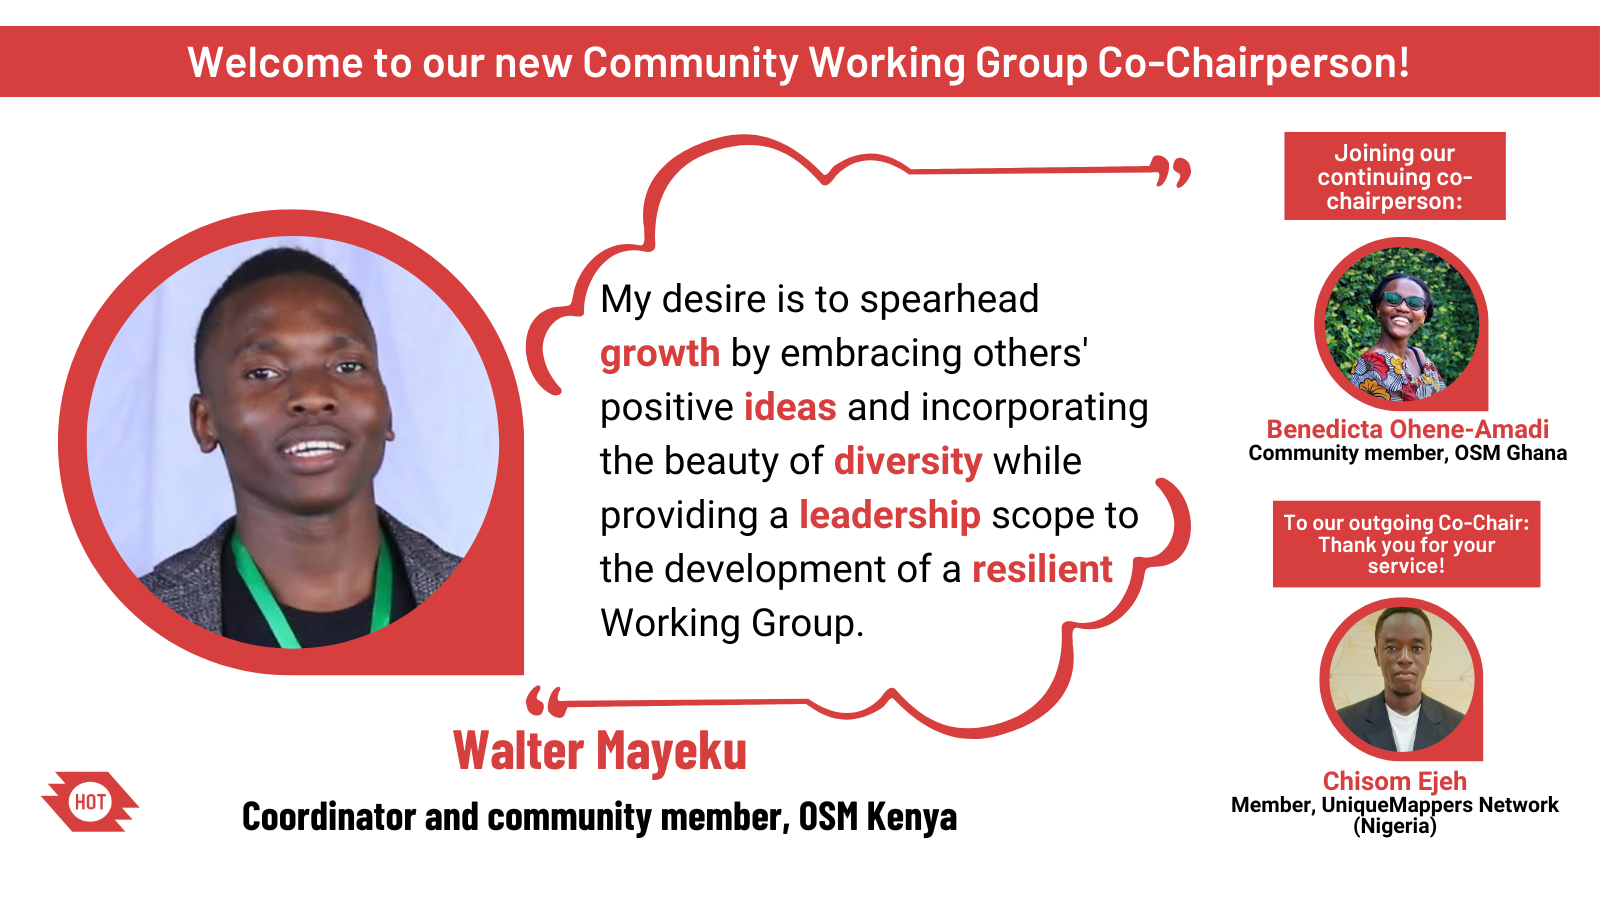 welcome walter as communitywg co-chairperson